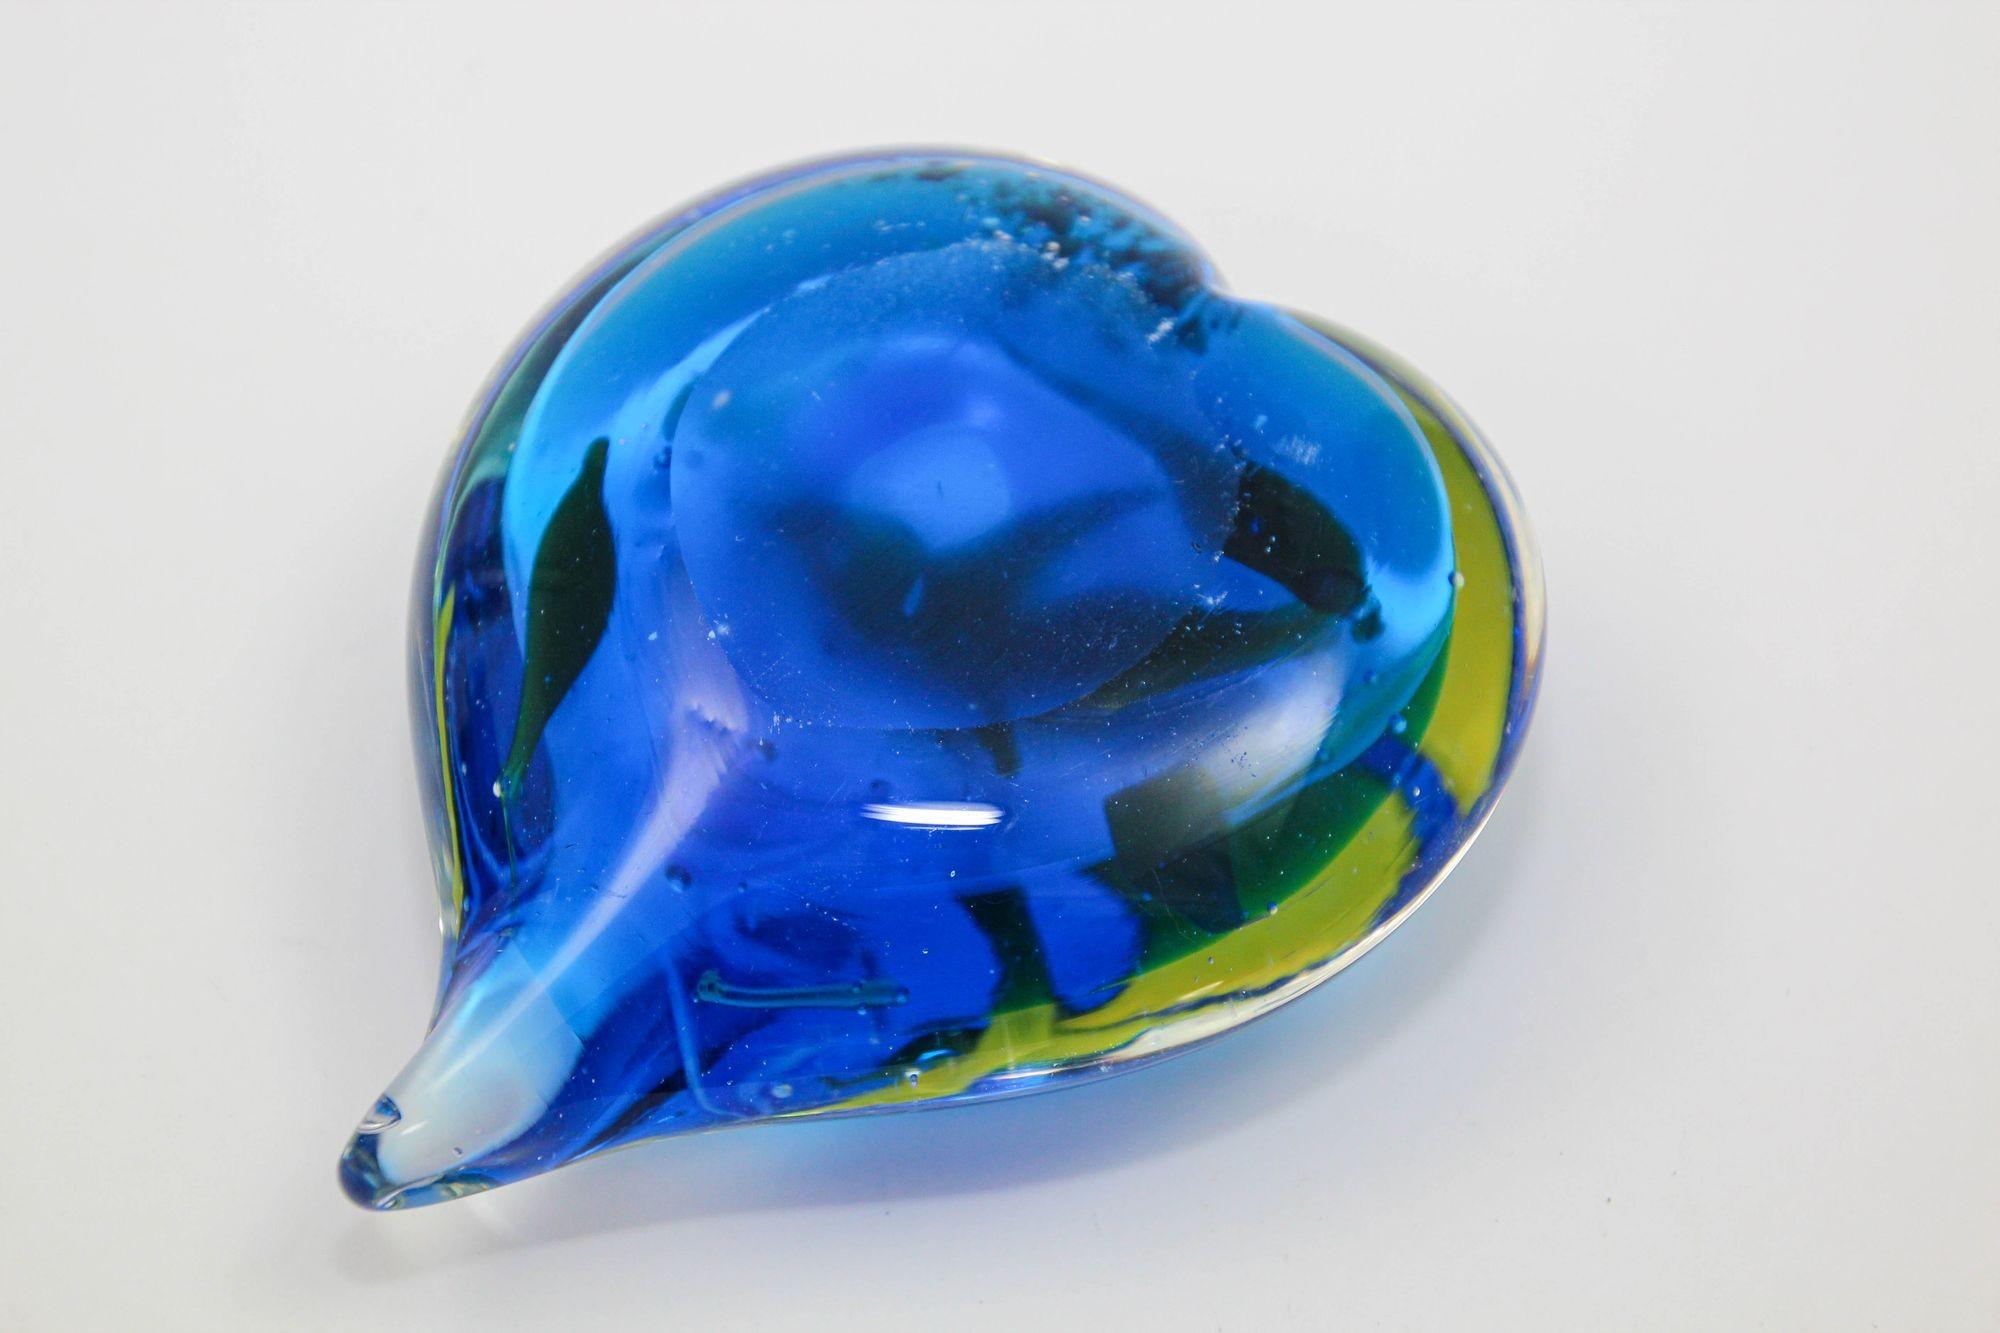 Murano Vintage Heart Shape Art Glass Paperweight Cobalt Blue, Yellow and Murine In Good Condition For Sale In North Hollywood, CA